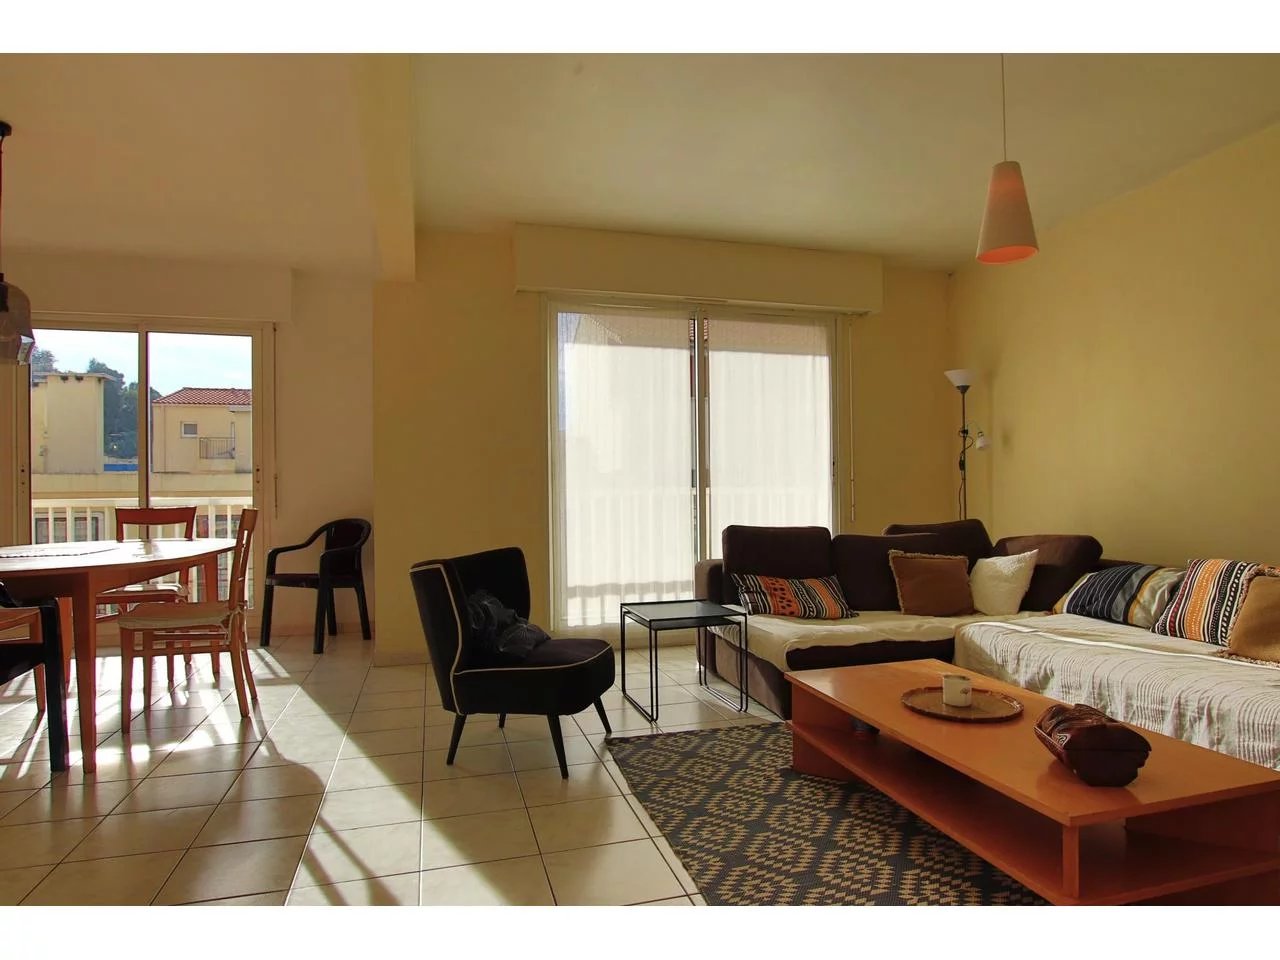 Appartement  6 Rooms 170m2  for sale   535 000 €